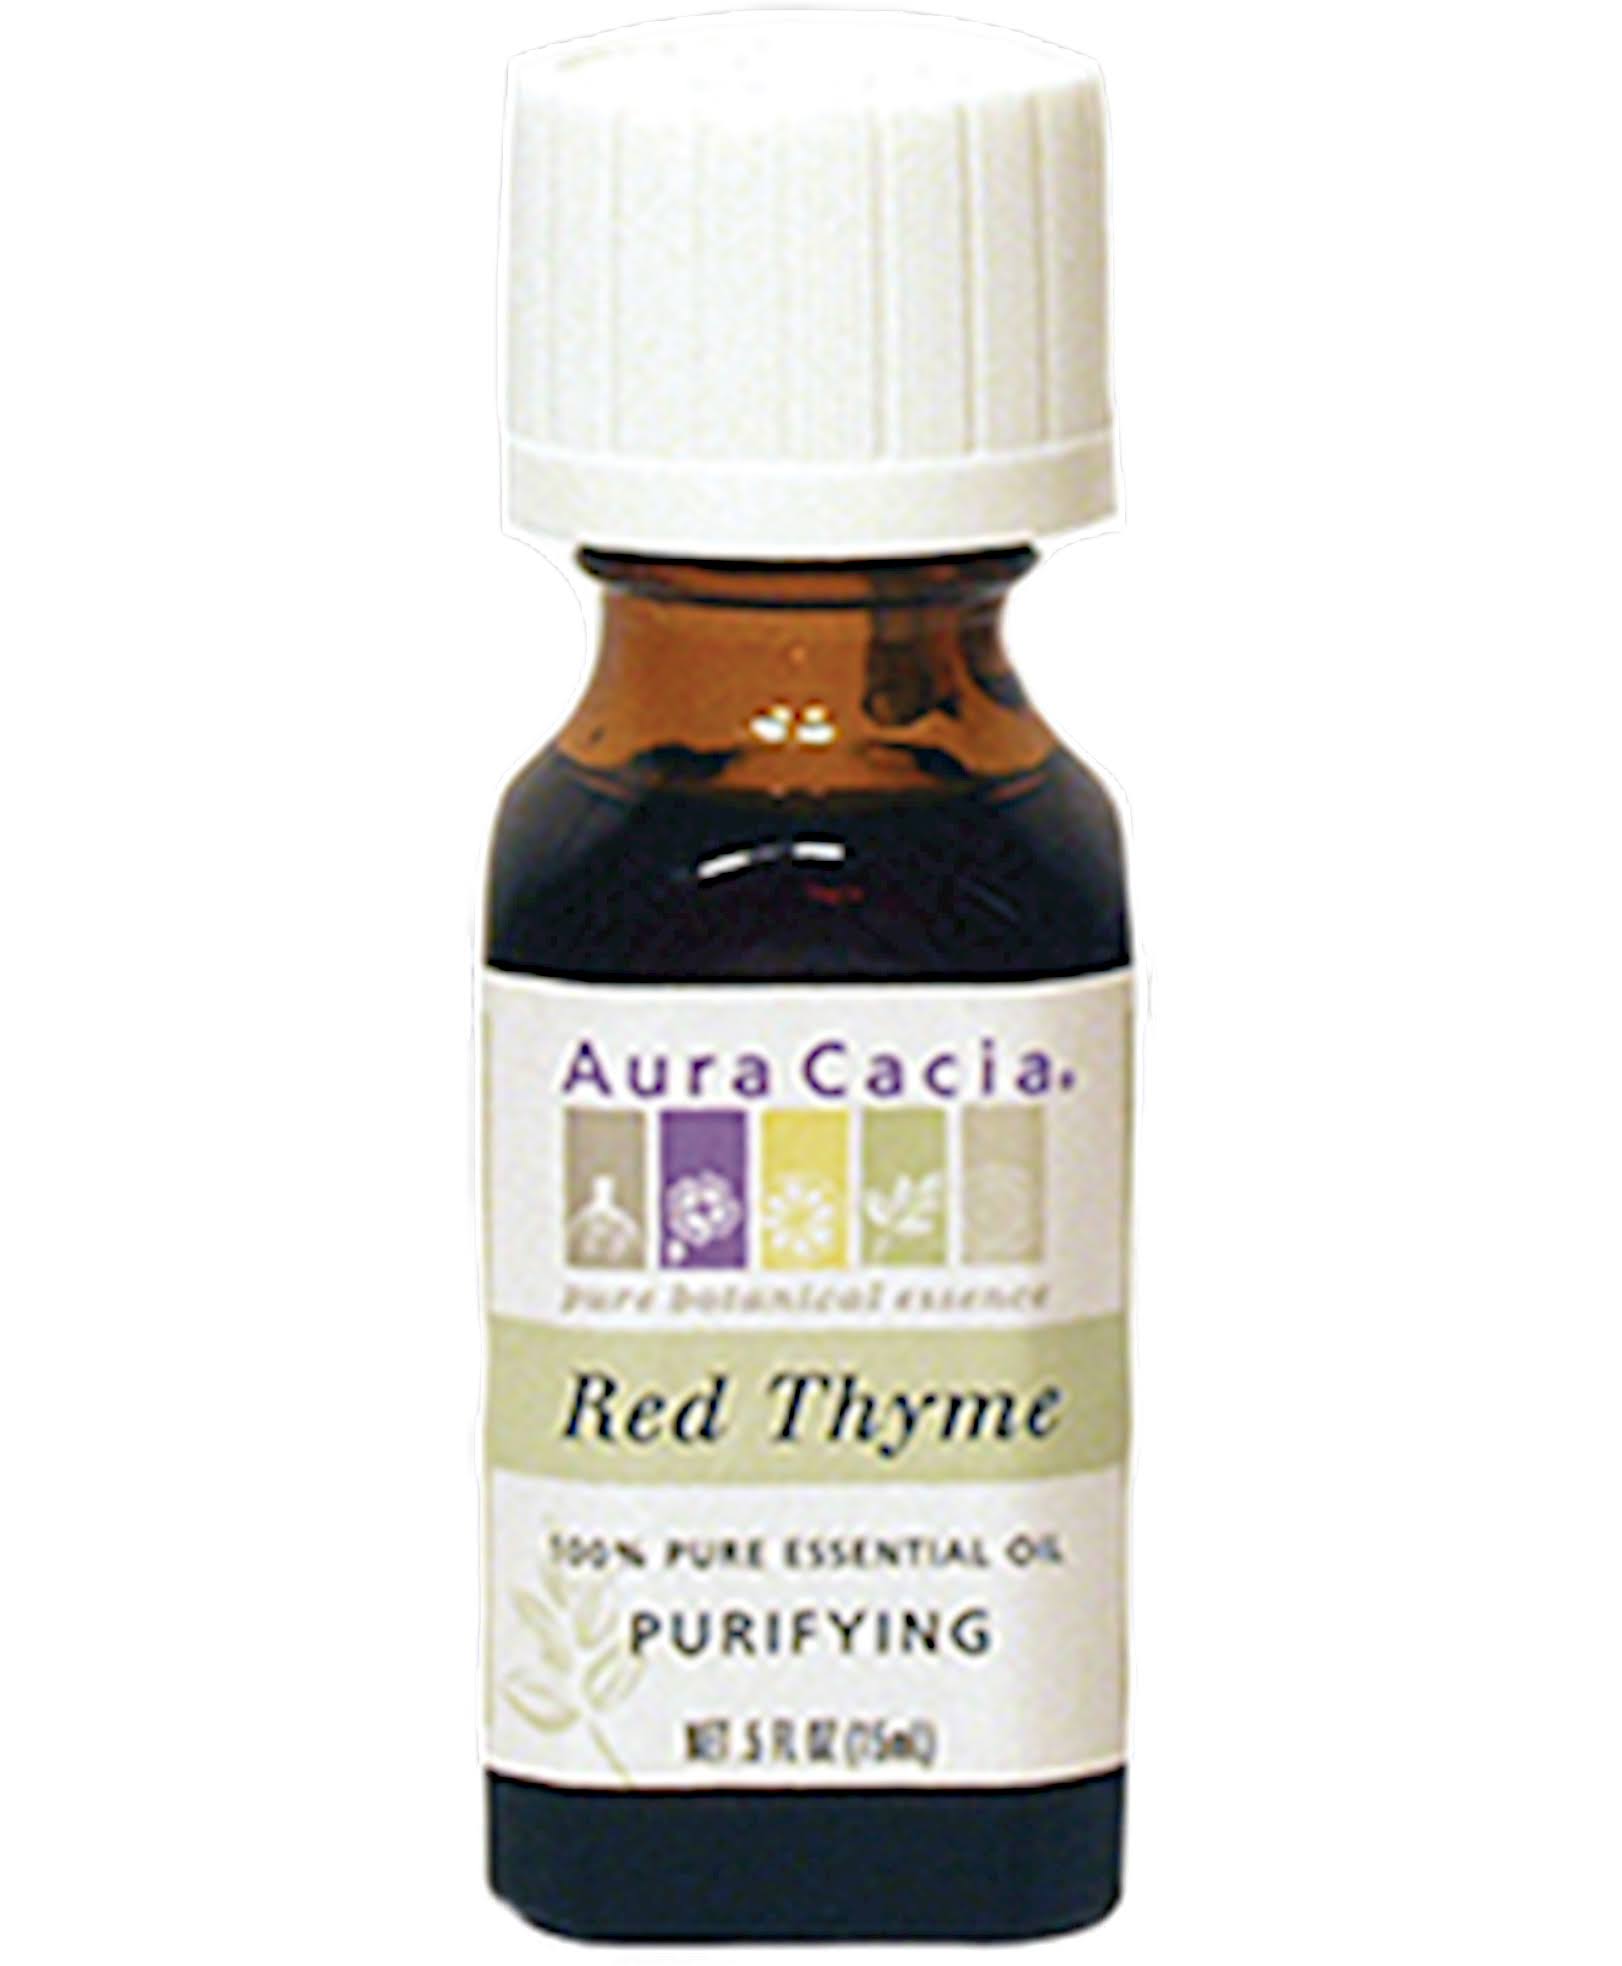 Aura Cacia 100% Pure Essential Oil - Red Thyme, Purifying, 0.5 oz